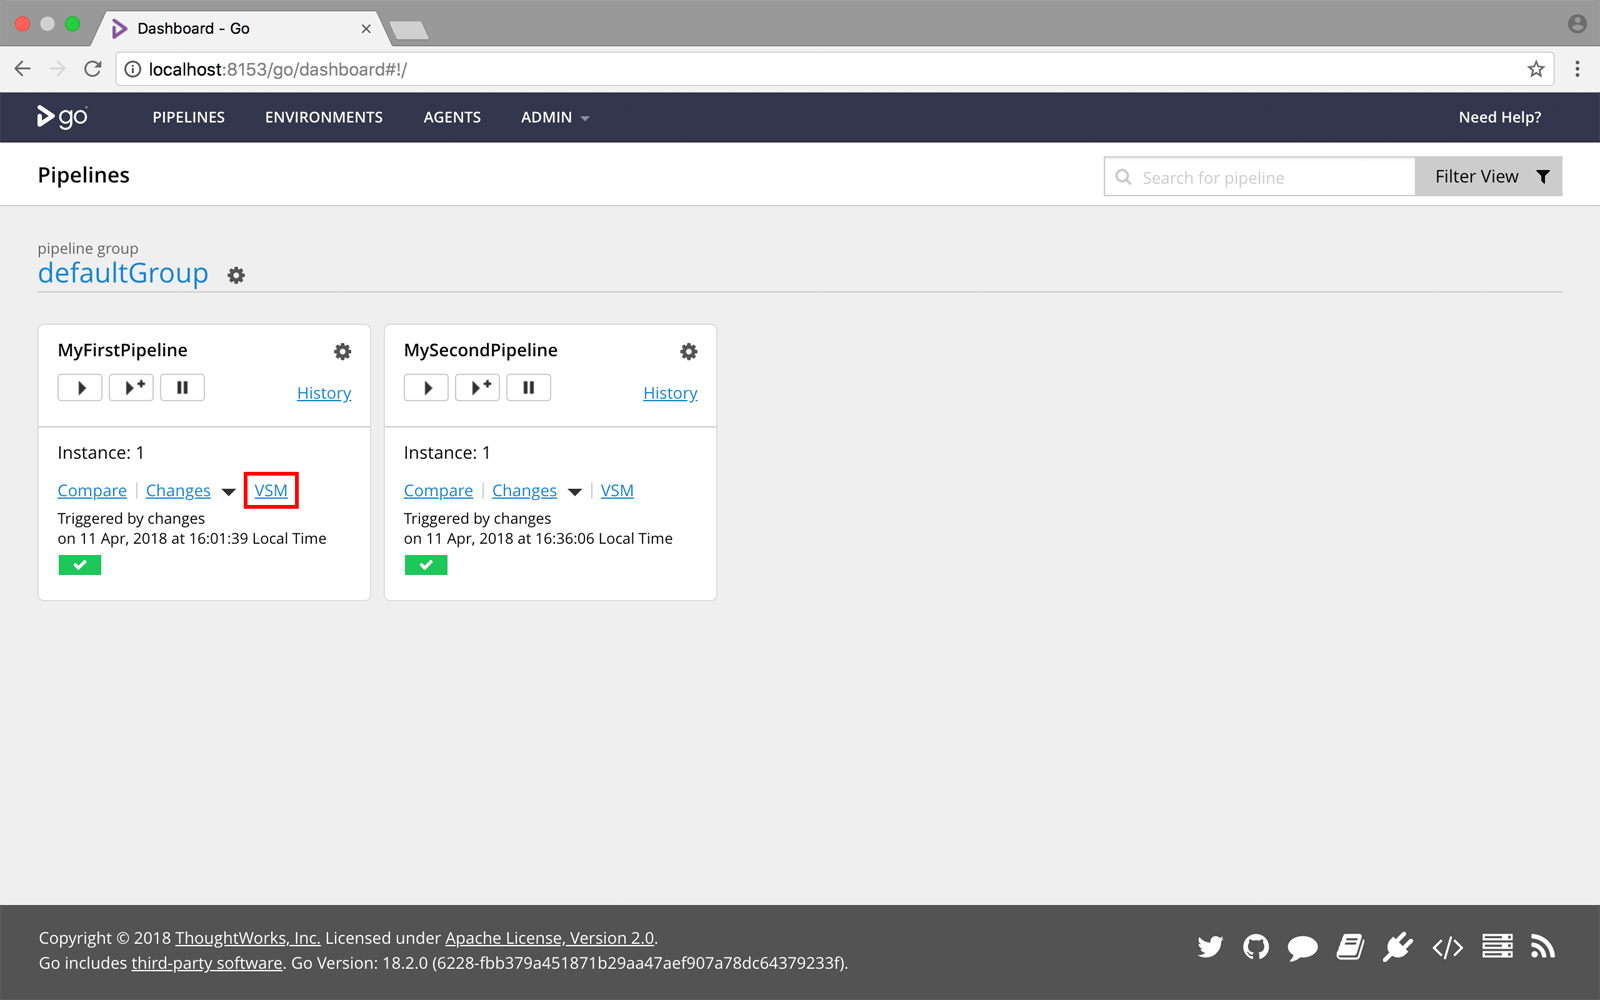 Dependent pipelines on the dashboard